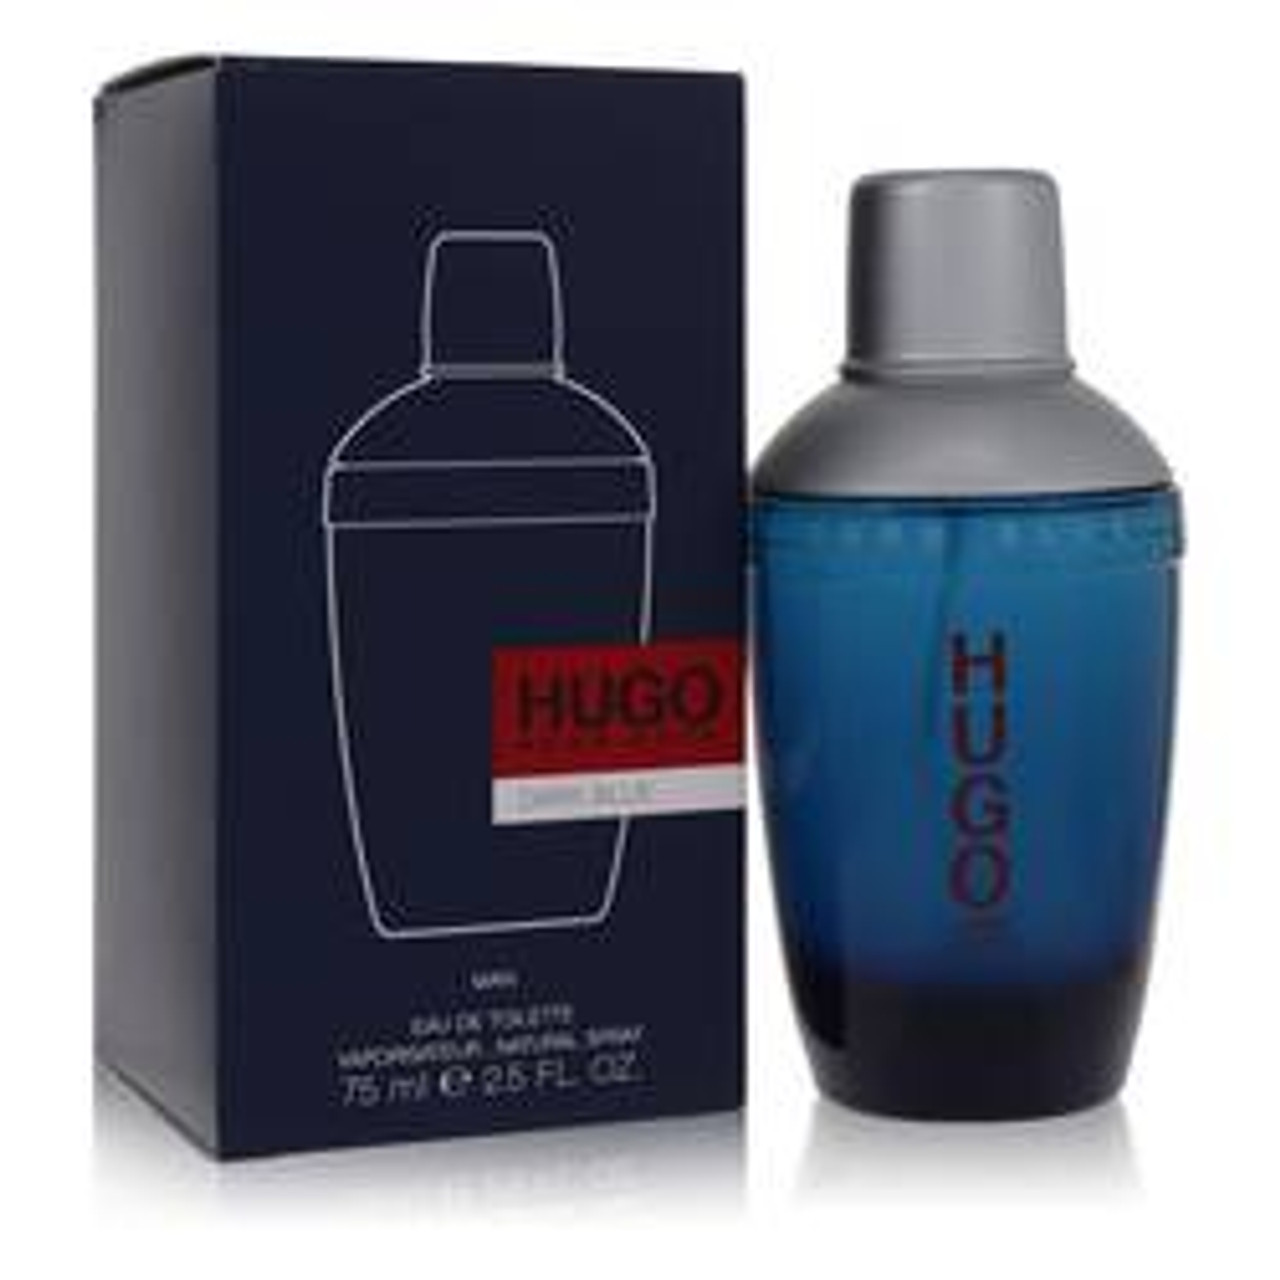 Dark Blue Cologne By Hugo Boss Eau De Toilette Spray 2.5 oz for Men - [From 116.00 - Choose pk Qty ] - *Ships from Miami